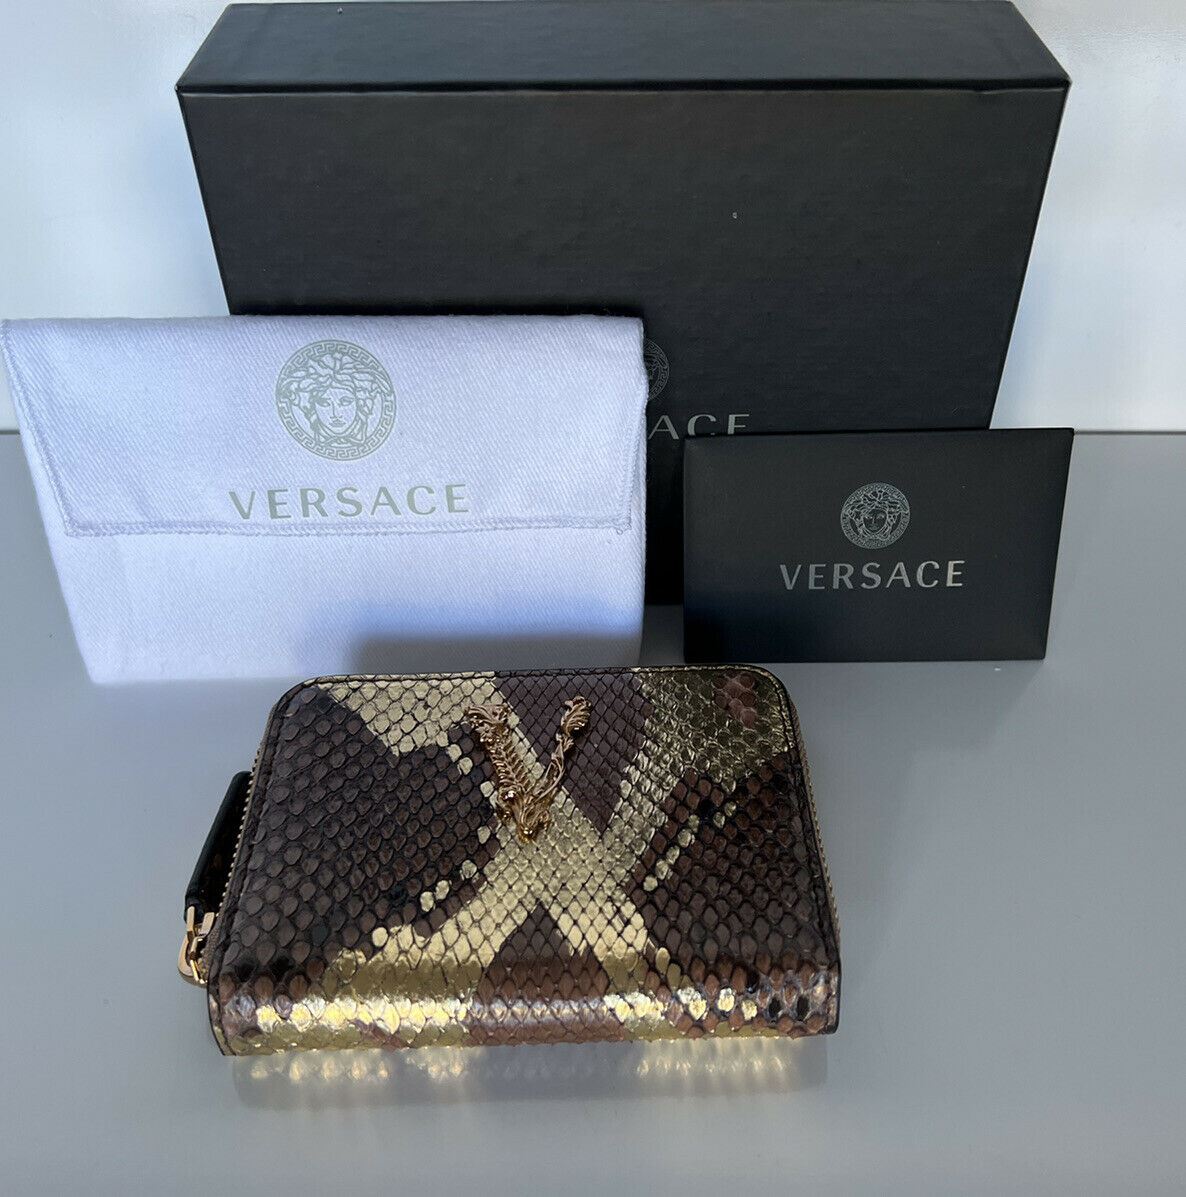 NWT $595 Versace Brown/Gold Snake Print Python Leather Small Zipper Wallet 682